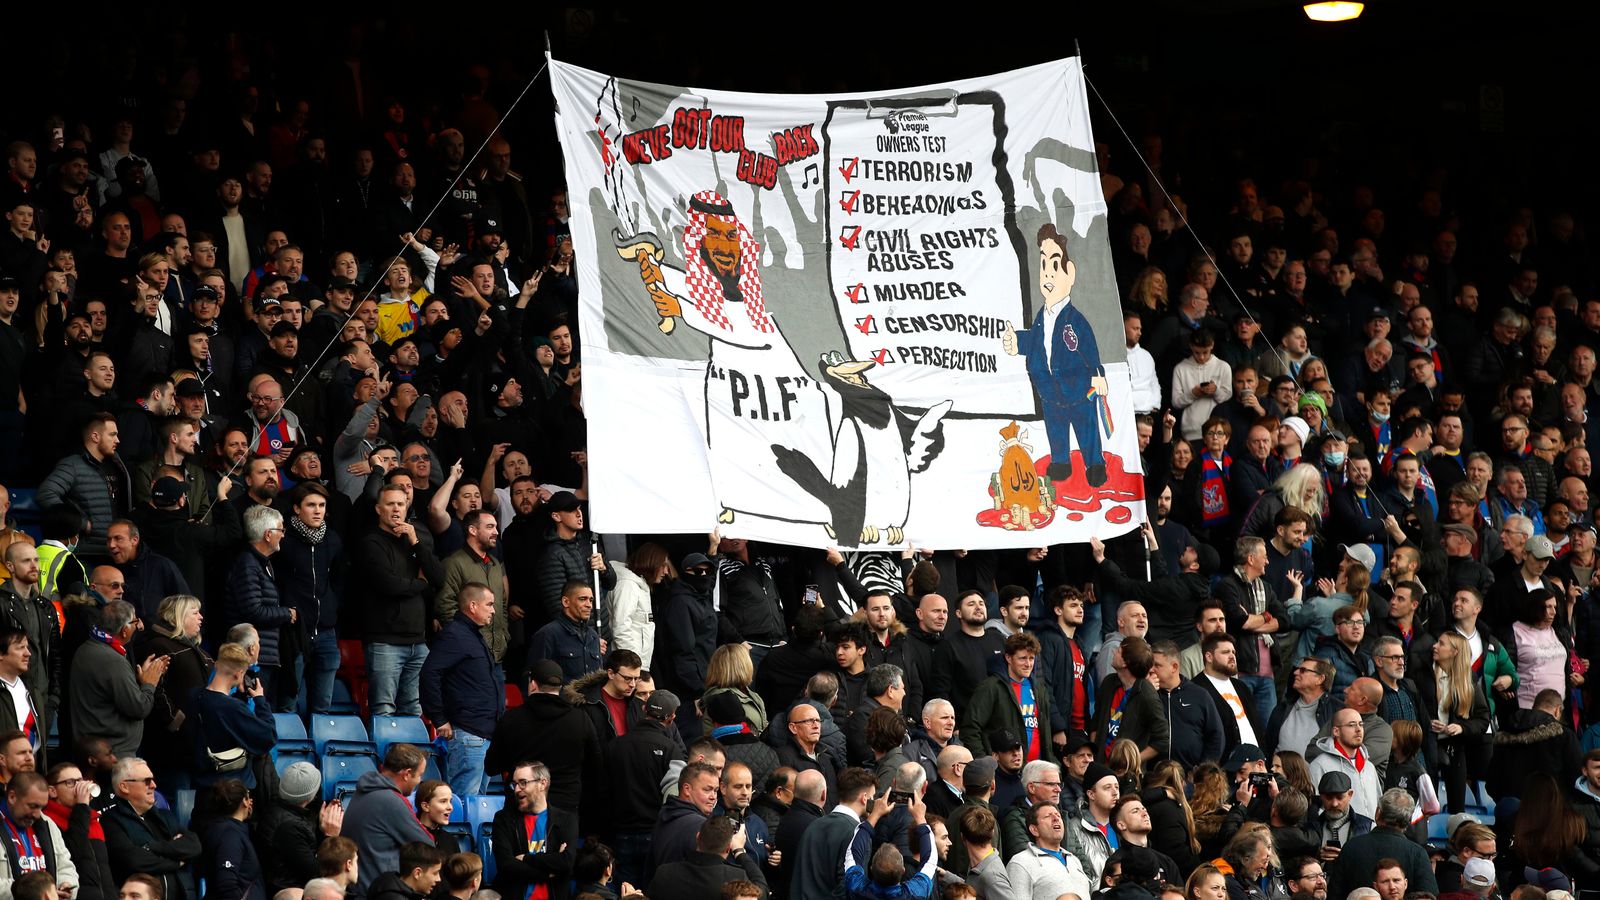 Newcastle United takeover: No further action over Crystal Palace fans’ banner criticising Magpies’ new owners, police say